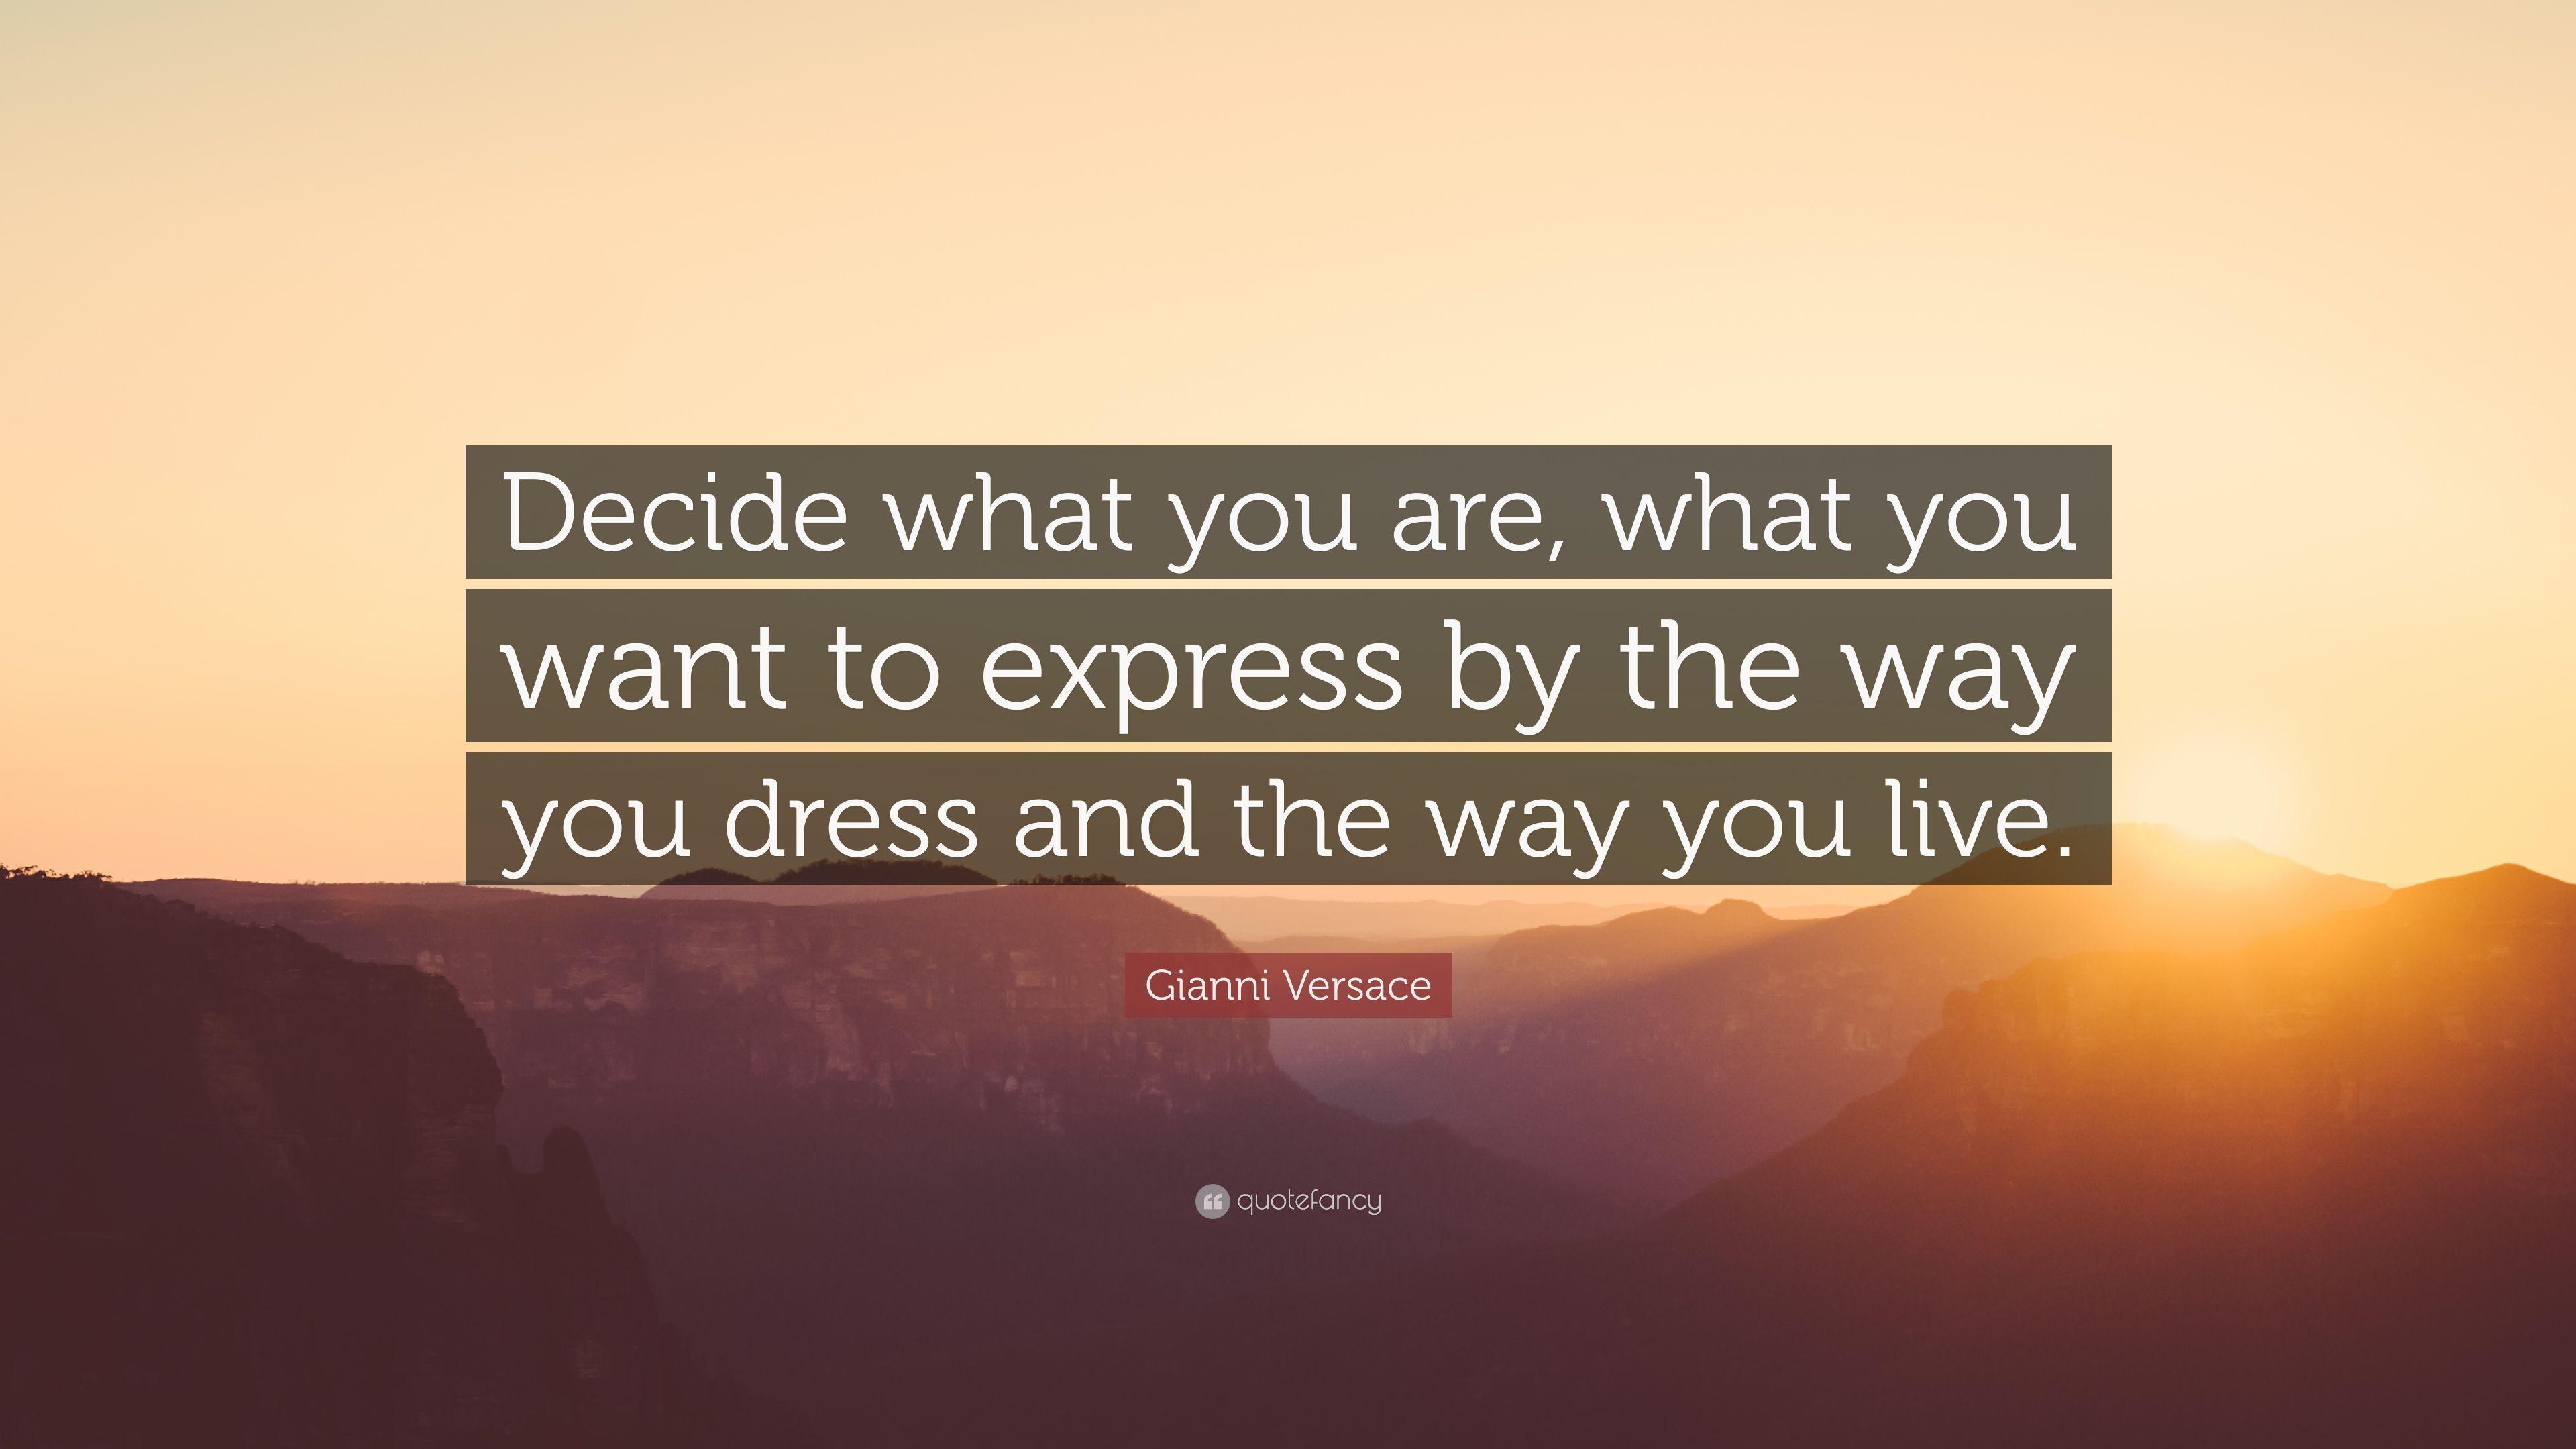 Gianni Versace Quote: “Decide what you are, what you want to